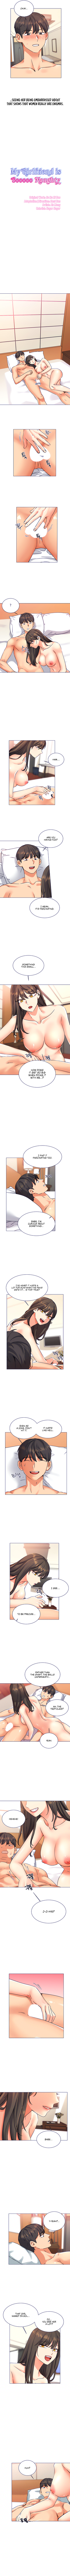 My girlfriend is so naughty Chapter 17 - Page 4